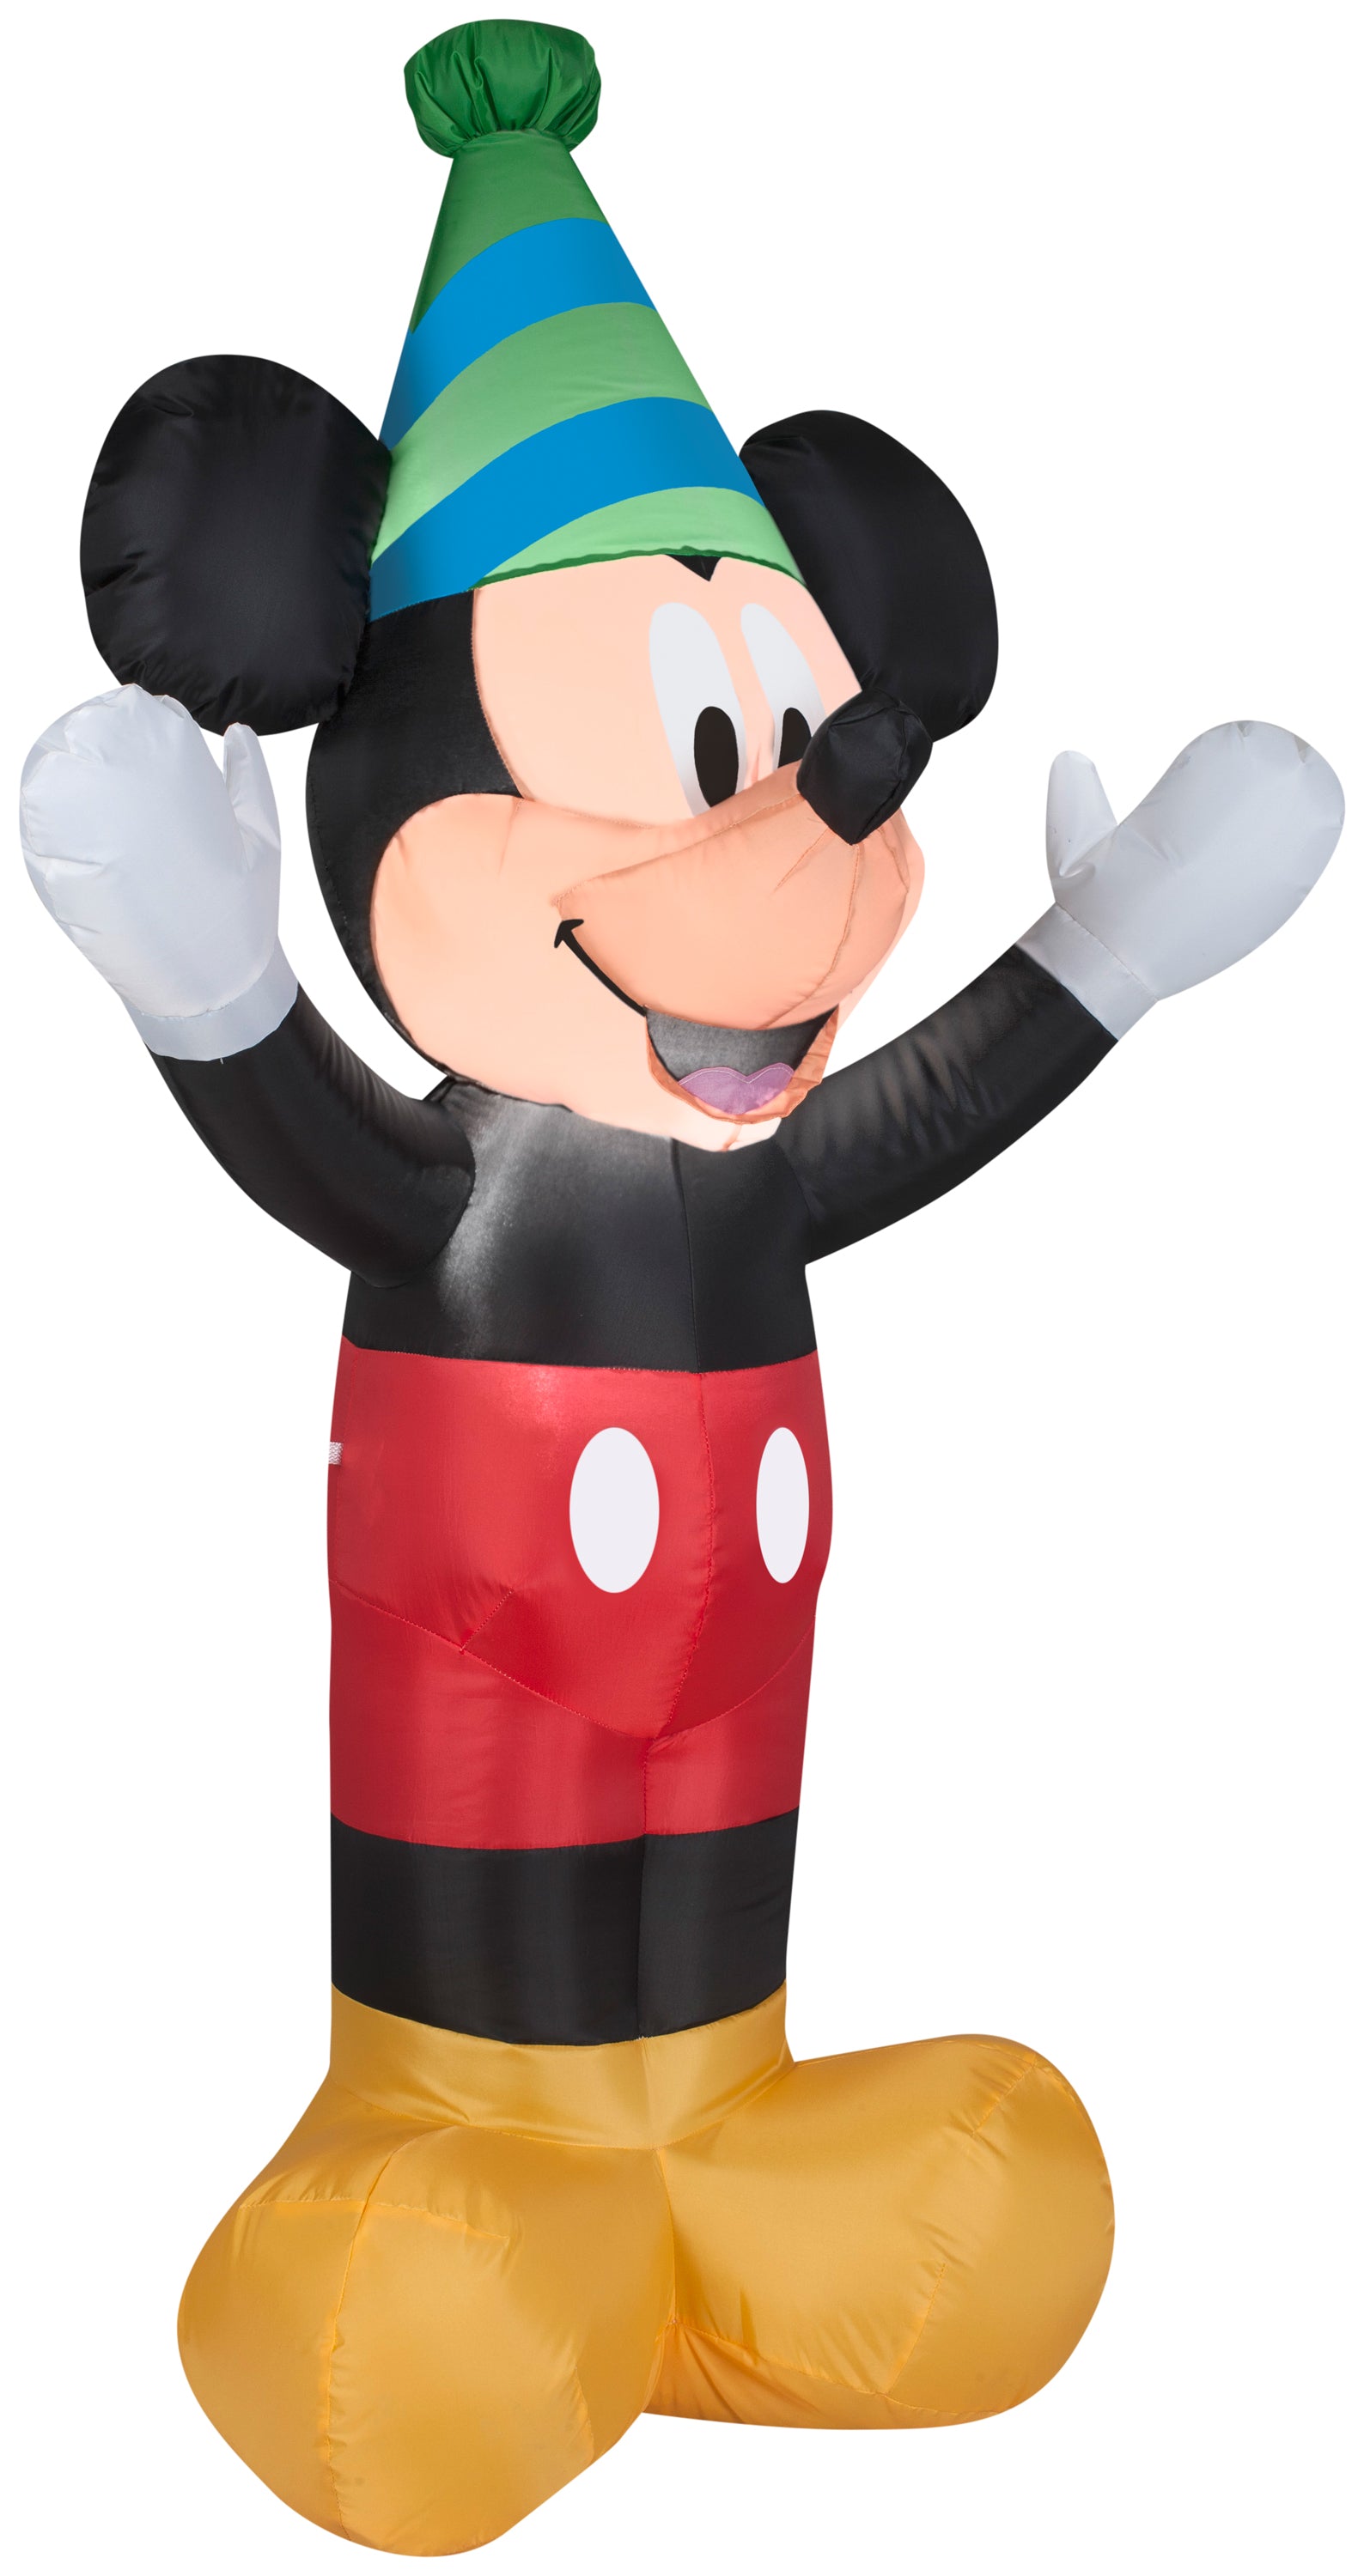 Gemmy 4 ft Tall Airblown Inflatable Birthday Party Mickey Mouse